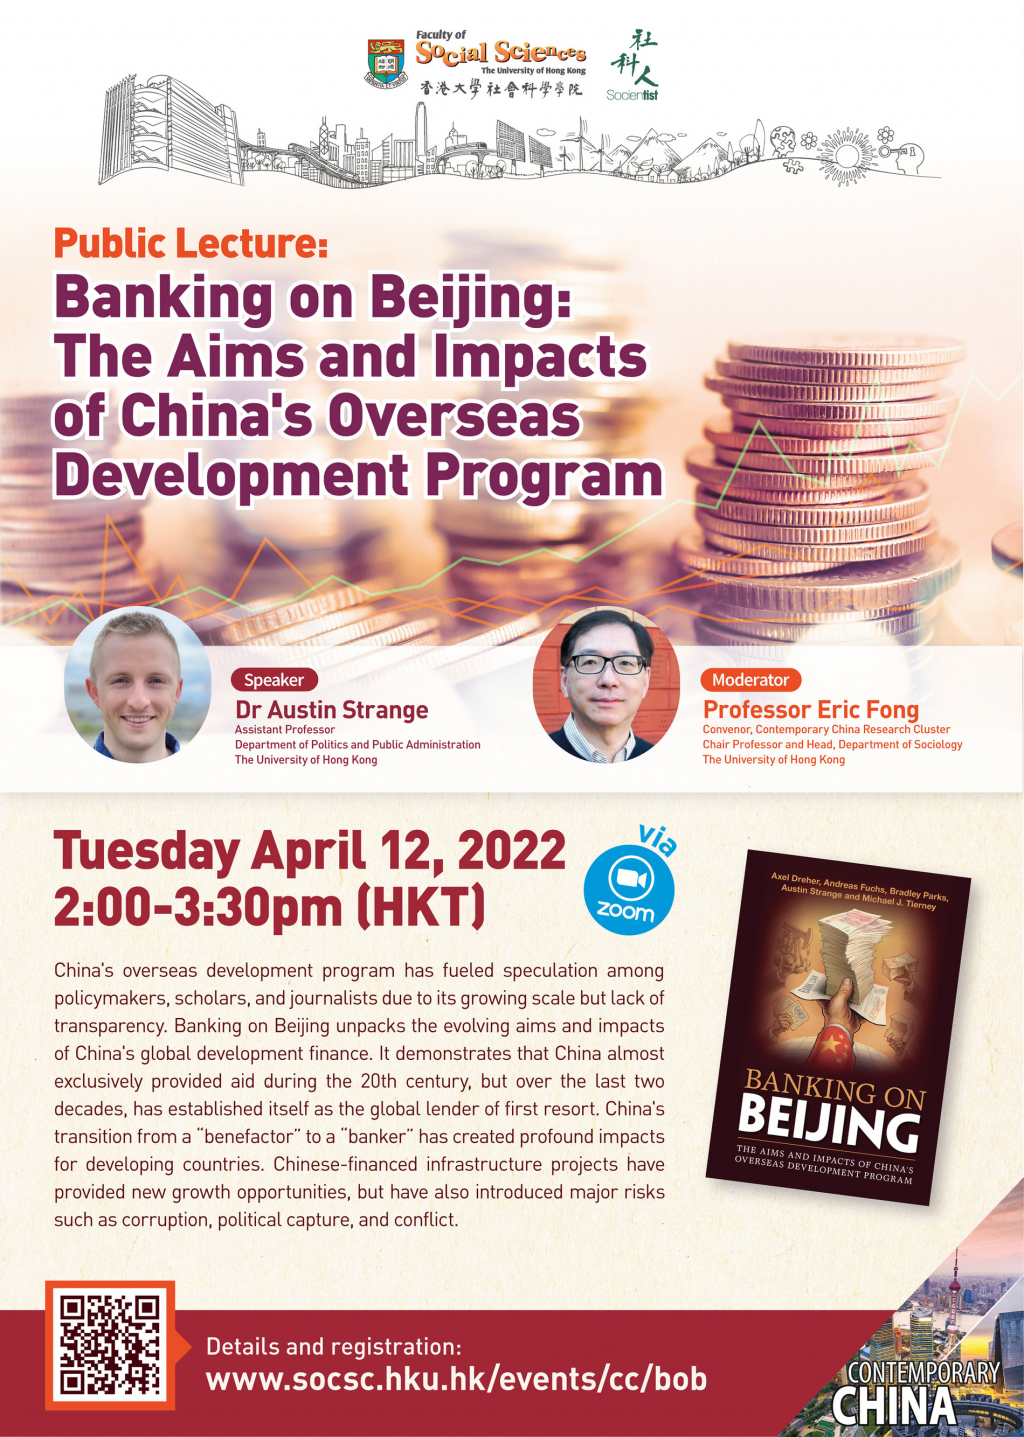 Contemporary China Research Cluster Public Lecture - Banking on Beijing: The Aims and Impacts of China's Overseas Development Program